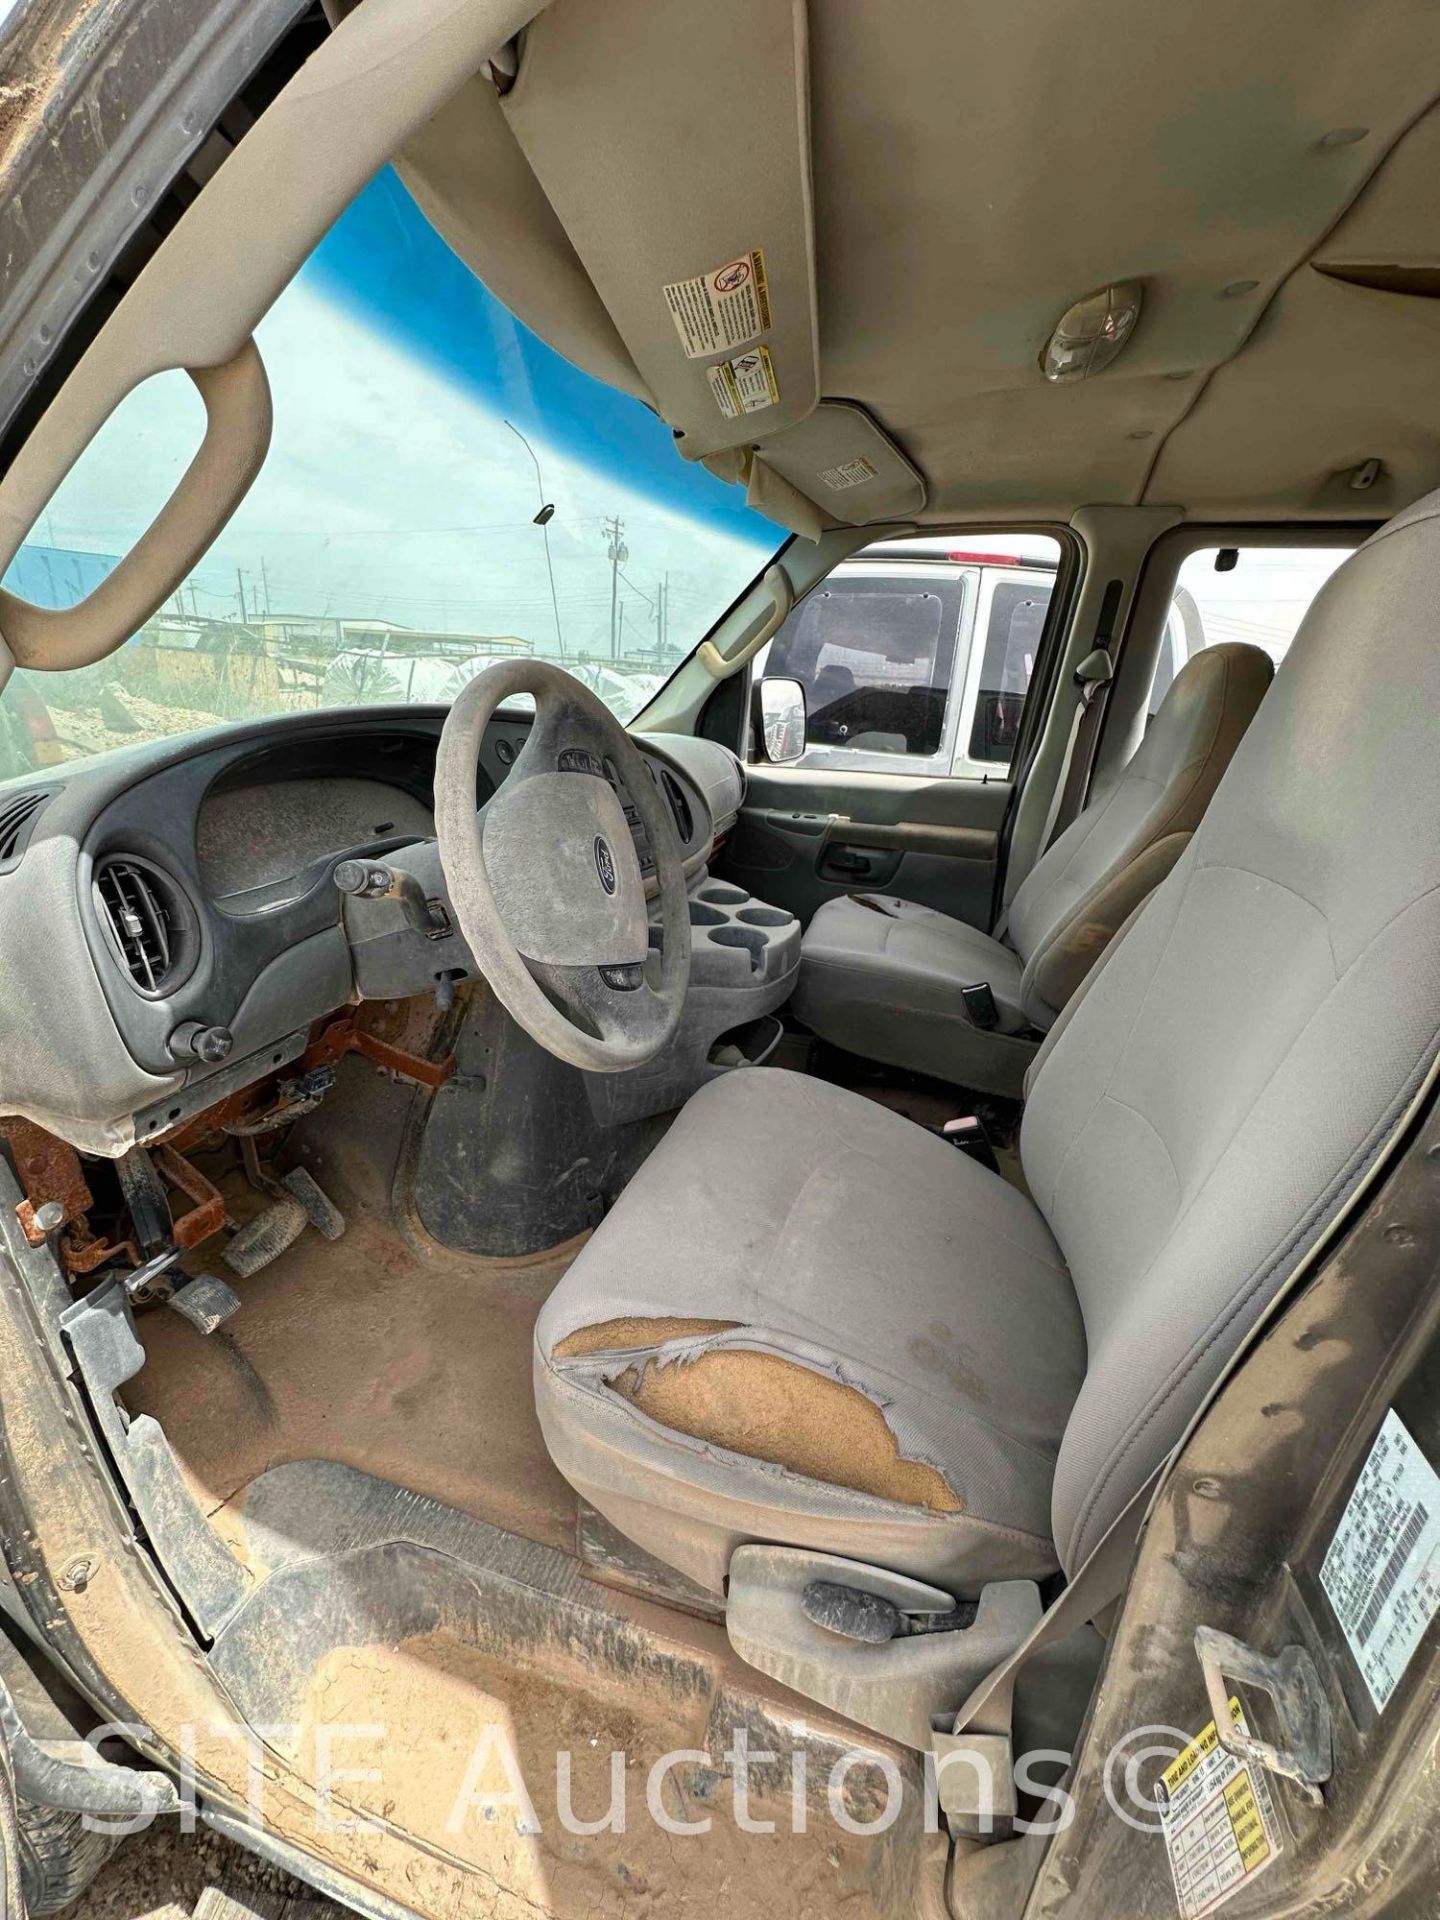 2007 Ford E350 Van - Image 14 of 15